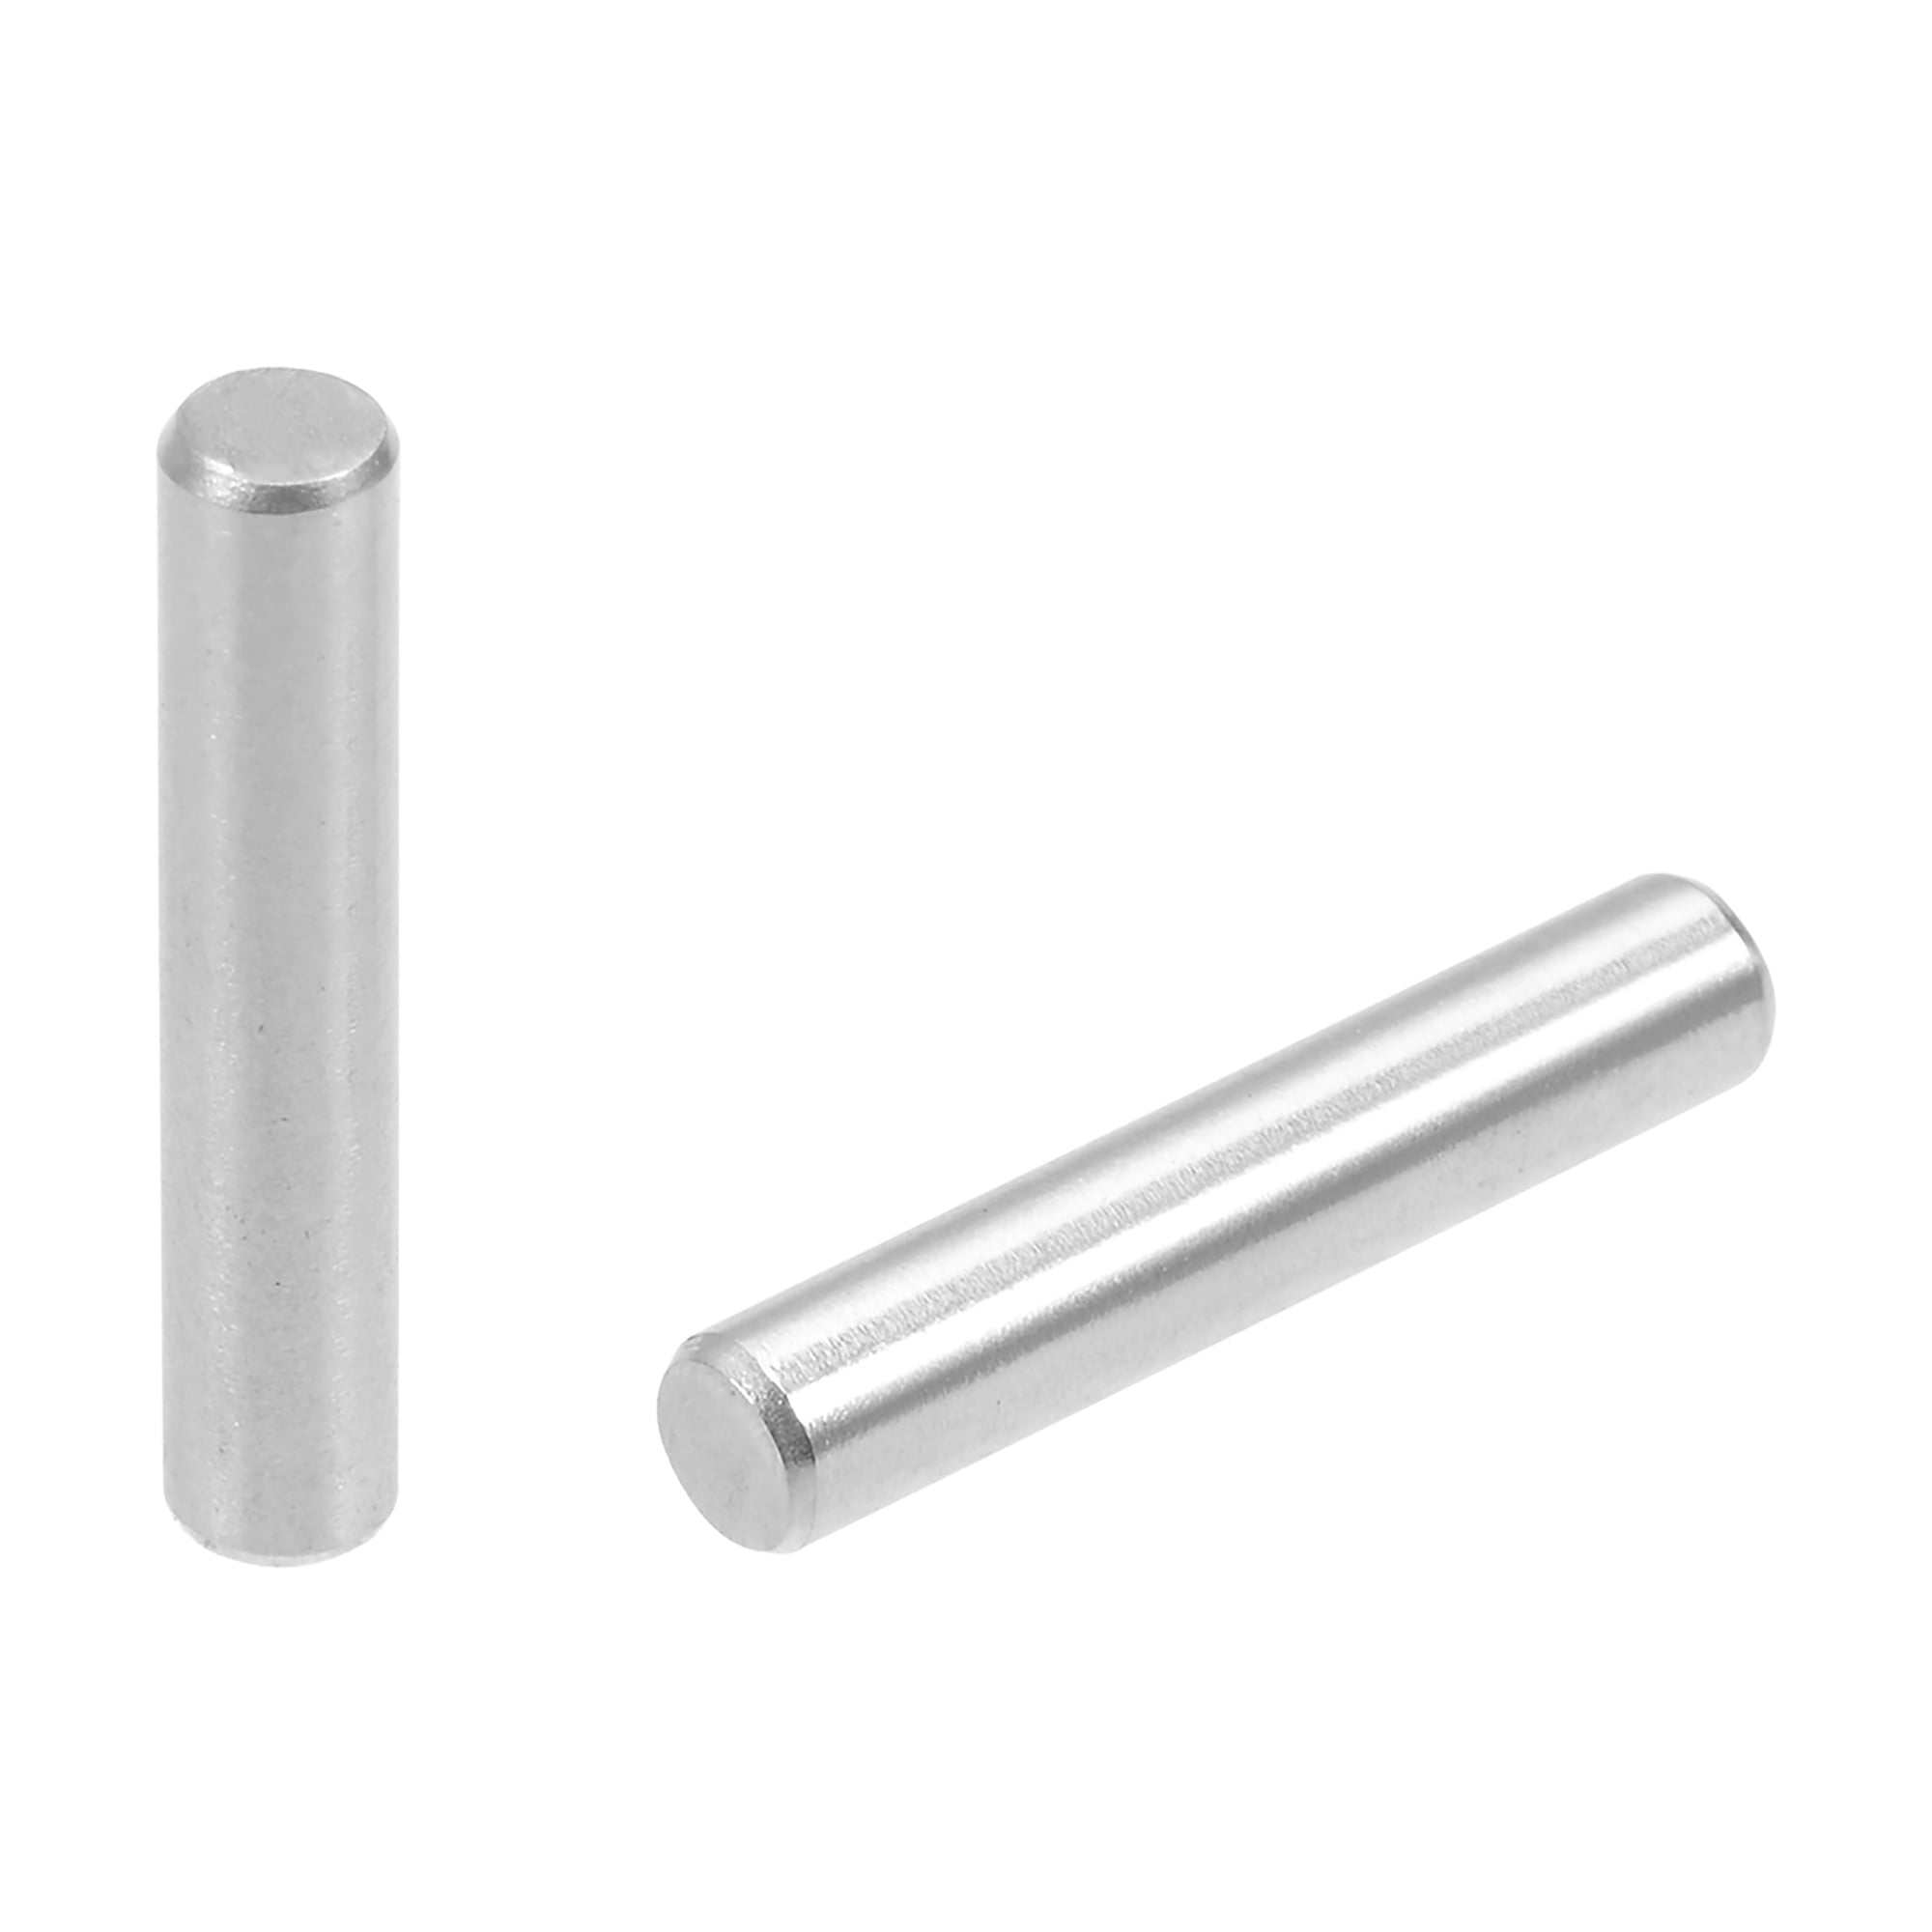 50pcs 3mmx16mm Dowel Pin 304 Stainless, Bunk Bed Pins